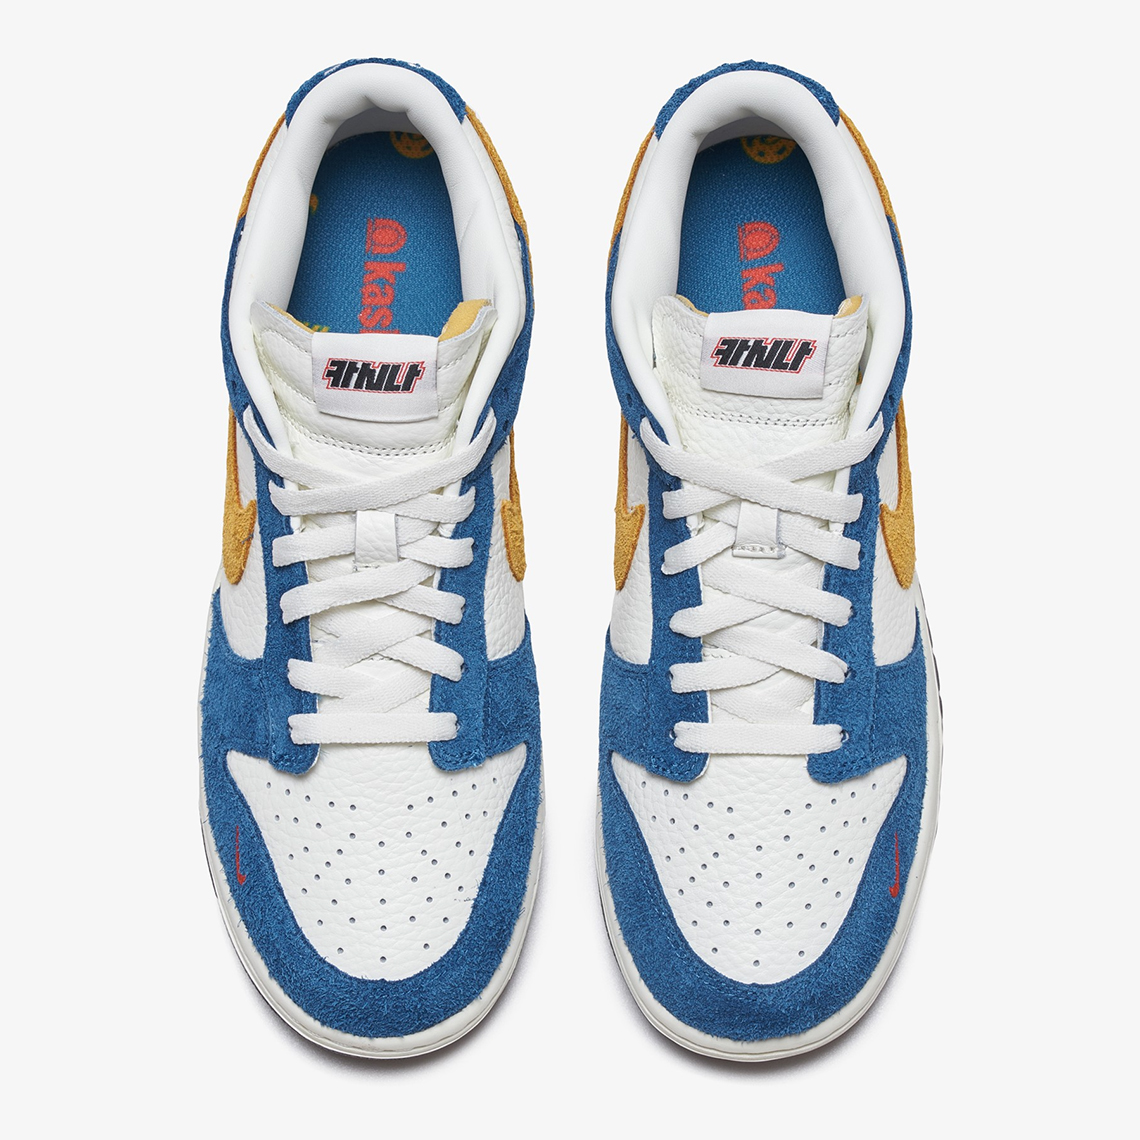 Kasina x Nike Dunk Low “Industrial Blue”  Aerial View